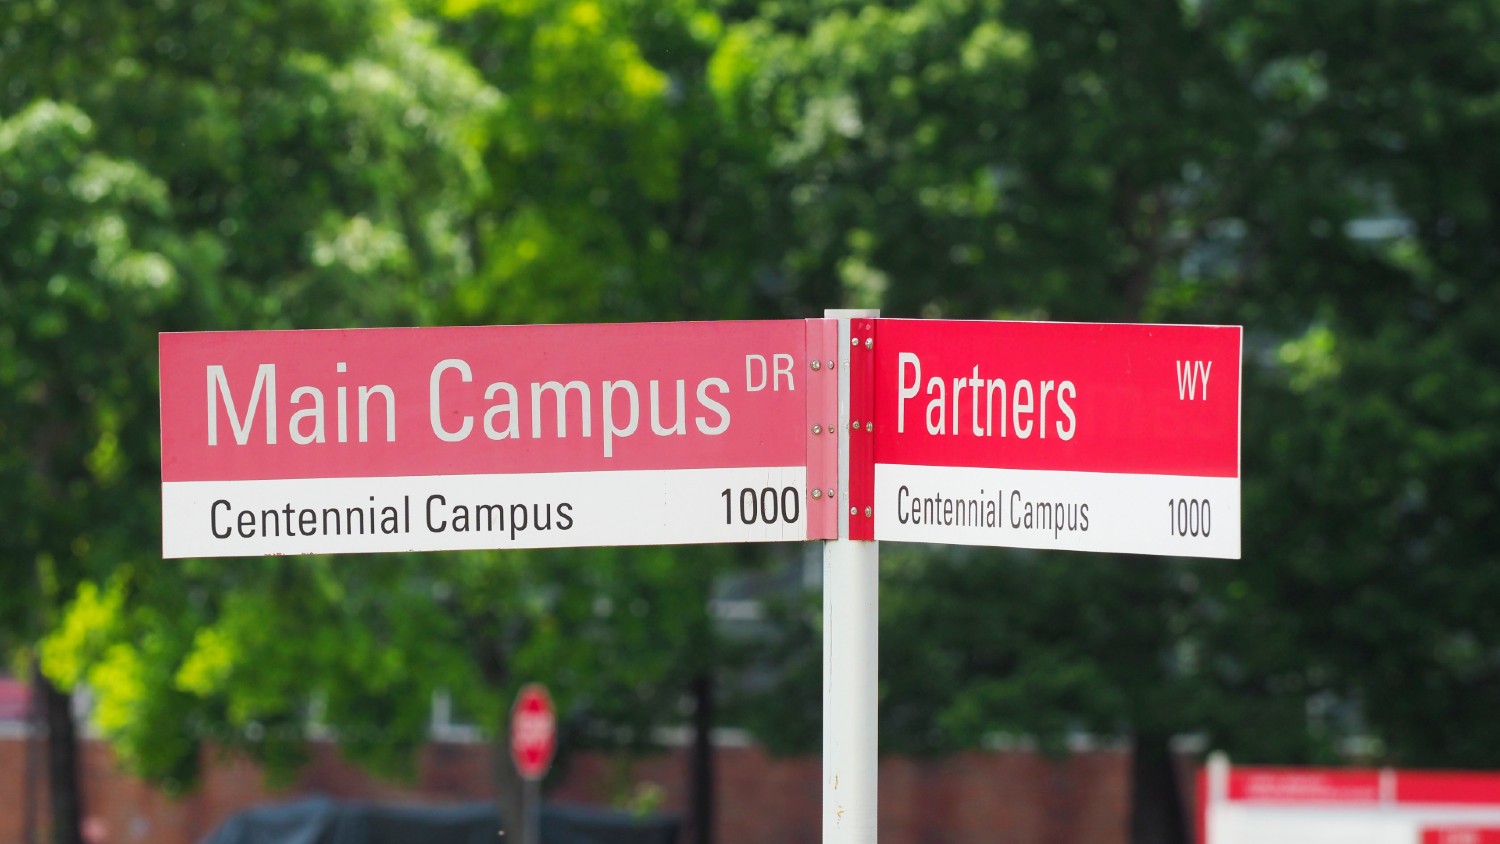 Signs at the intersection of main campus and partners drive